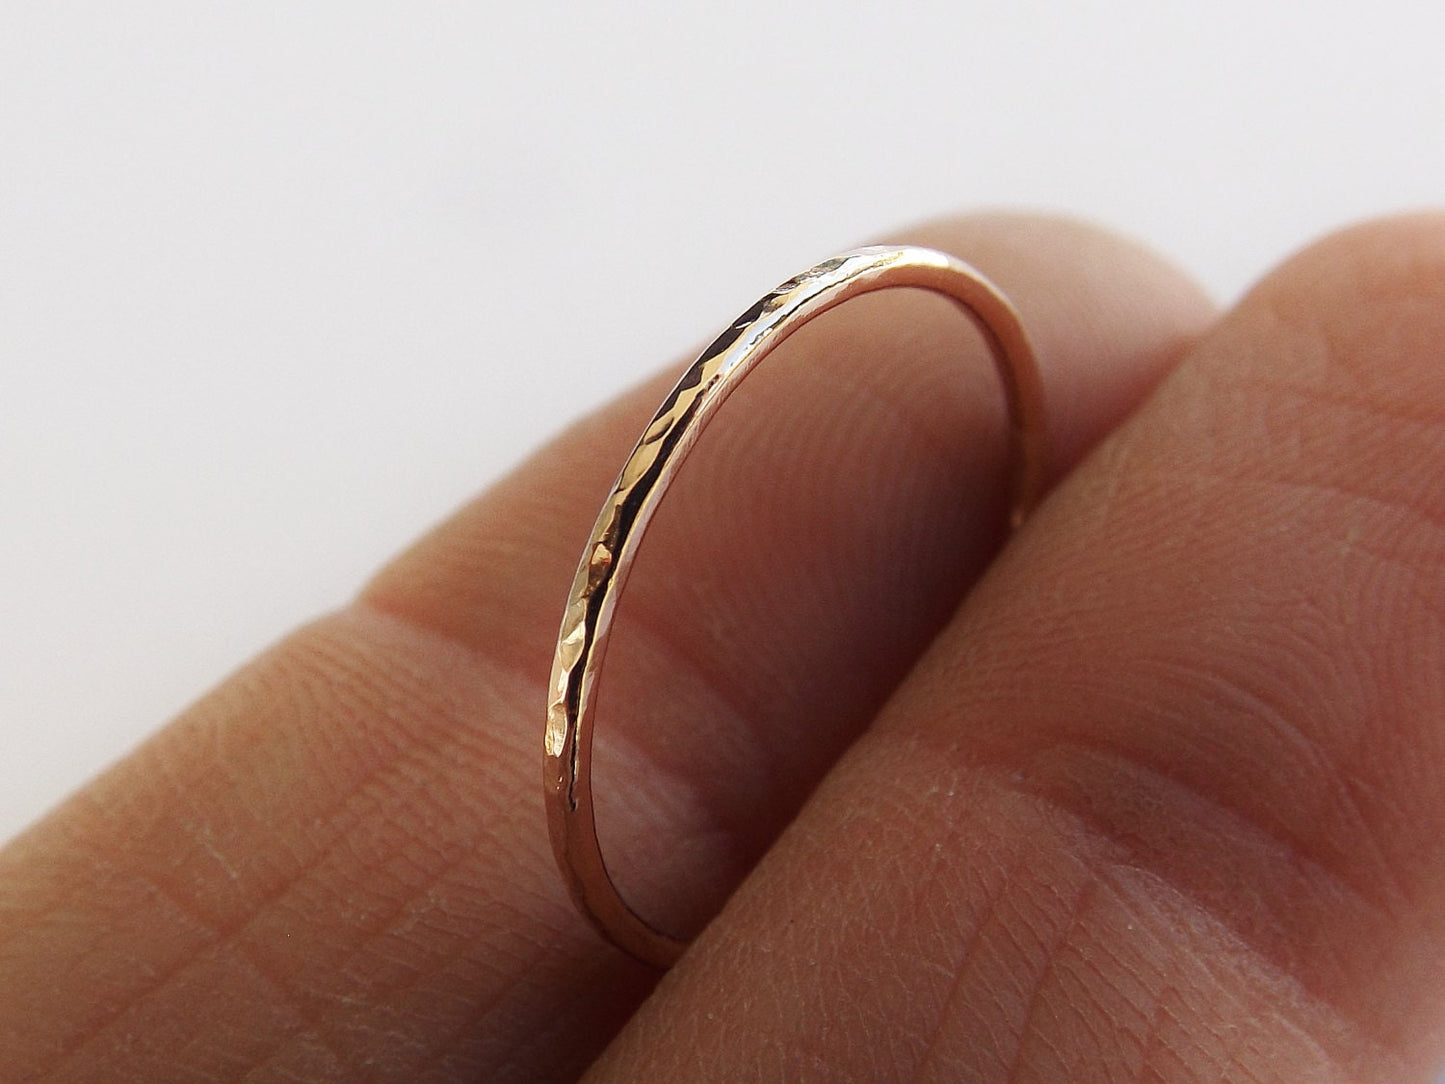 Slim Solid Gold Stacking Ring, Textured Rings, Minimalist Rings, Simple  Rings, Slim Stacking Rings, Gold Ring, Rings, Gift, Modern Band